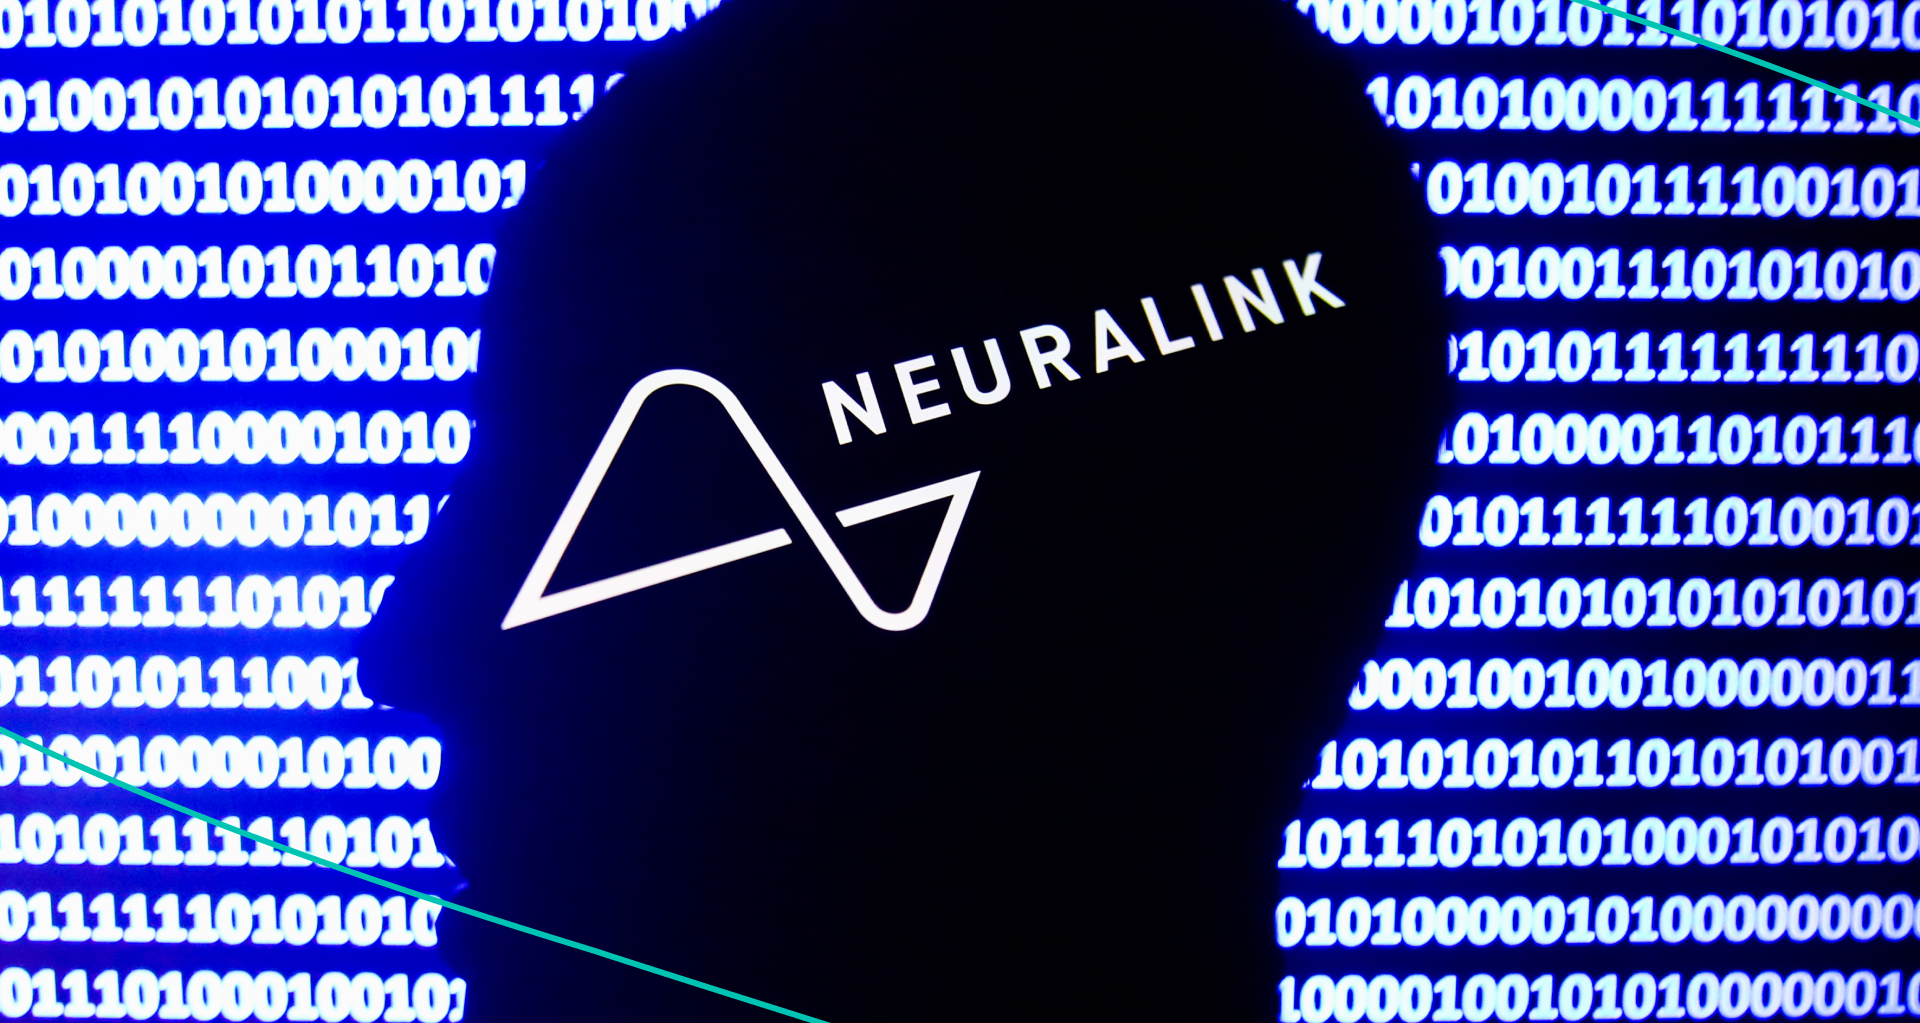 A graphic of Neuralink's logo with computer numbers in the background